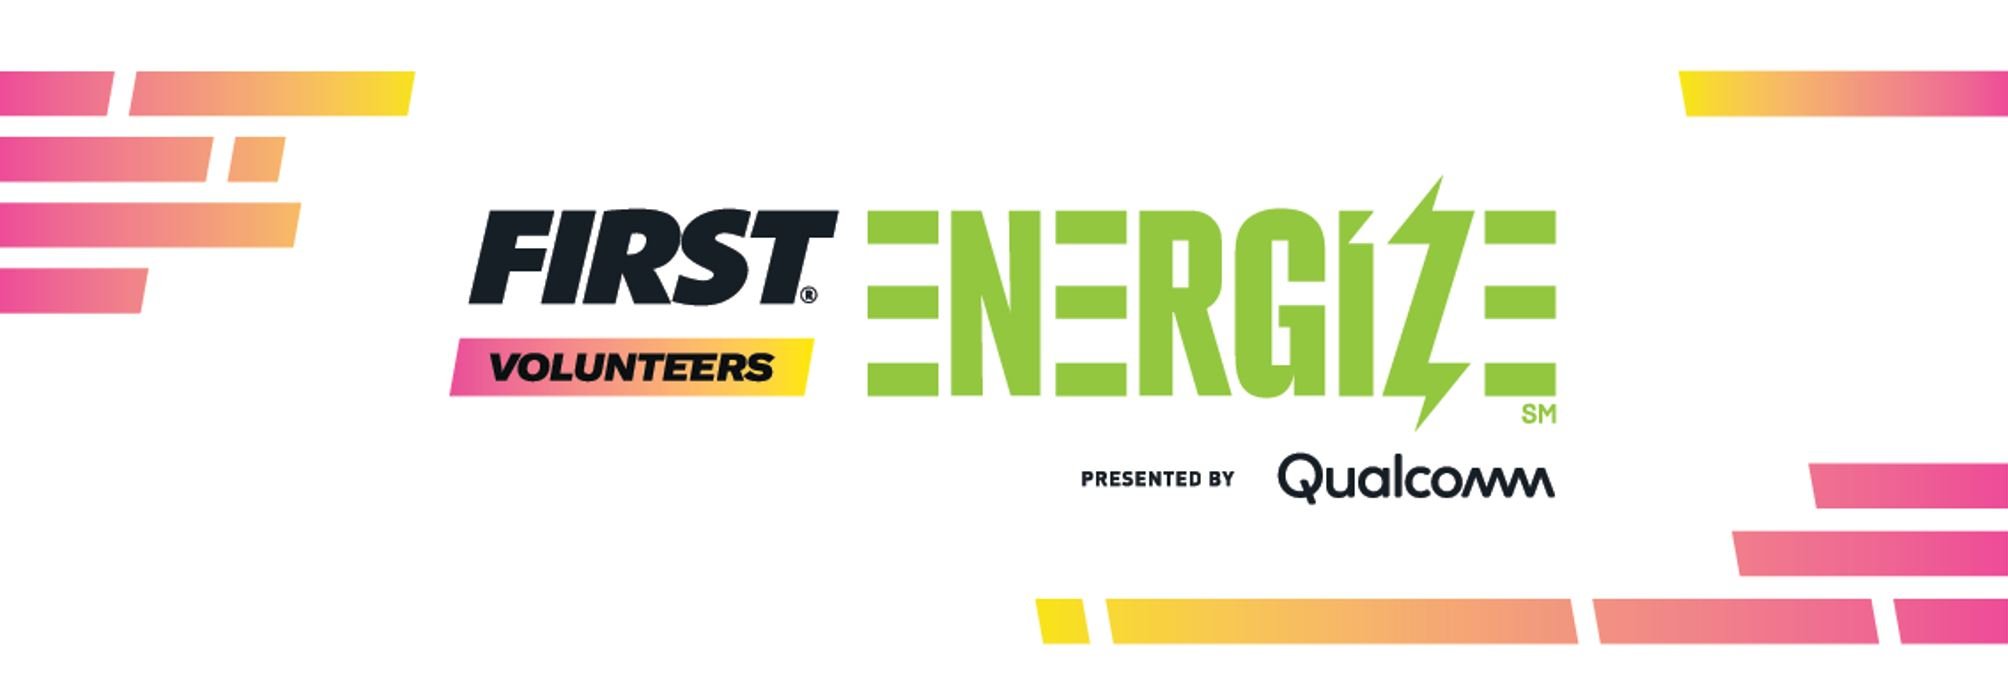 What to Expect as a Volunteer in the 2022-2023 FIRST ENERGIZE Season